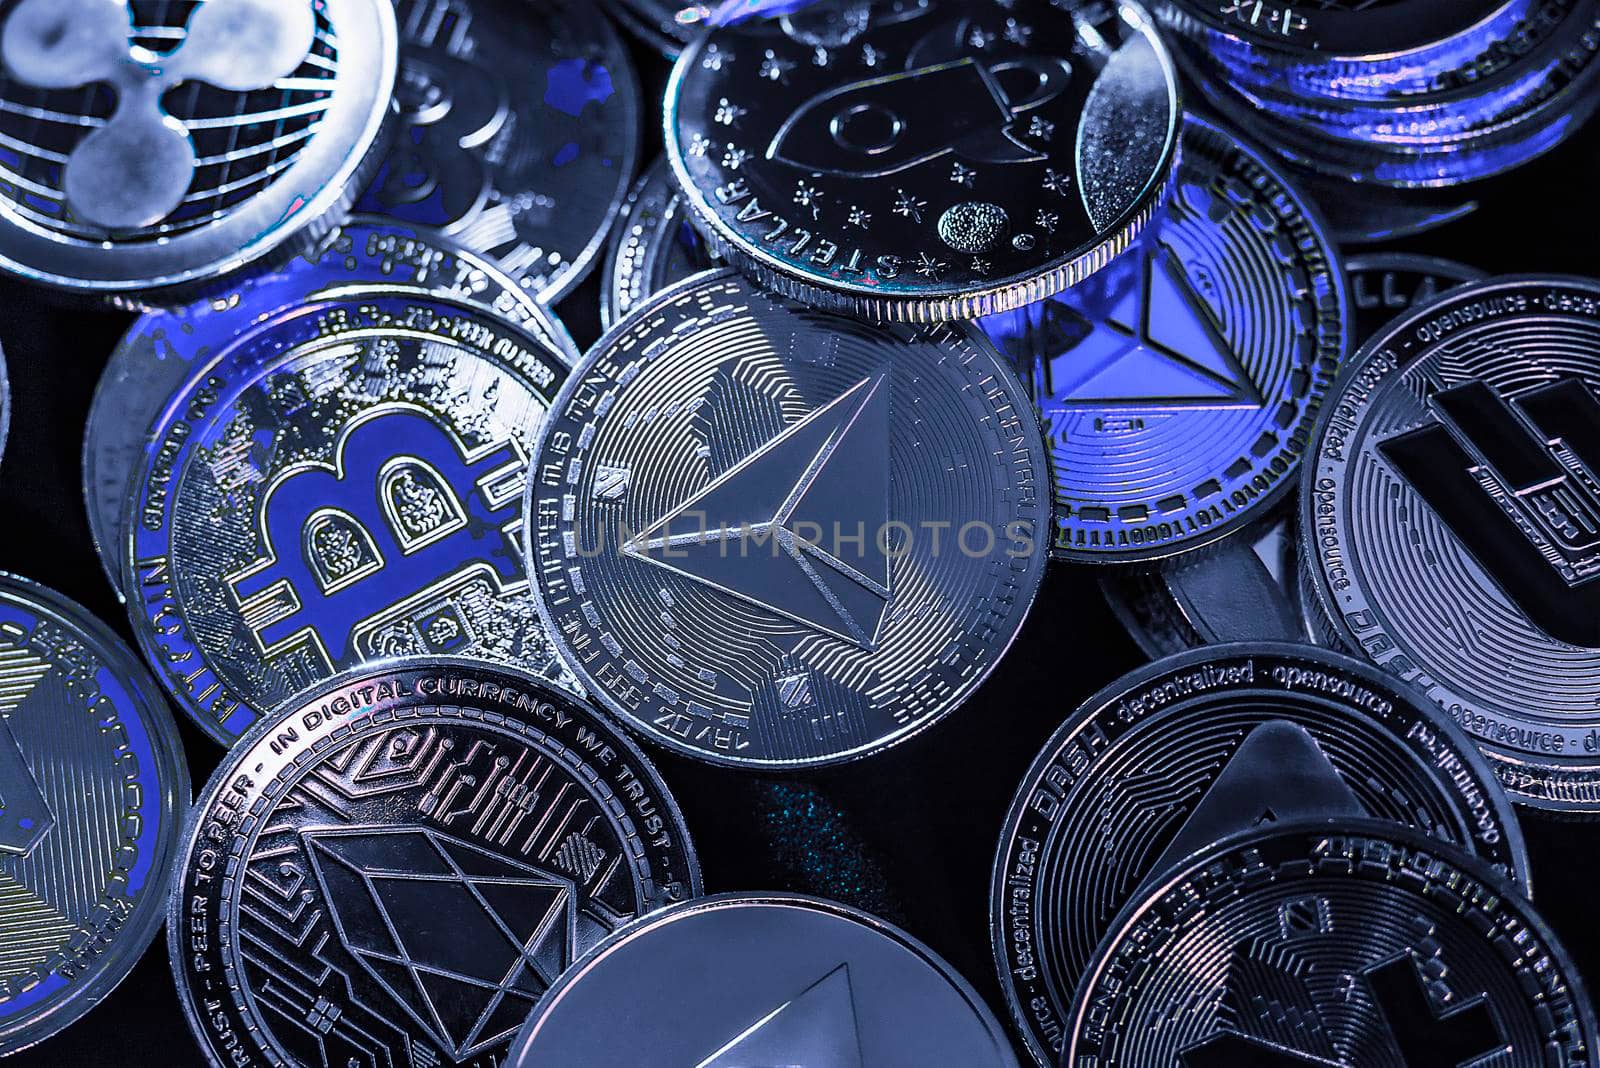 Horizontal view of cryptocurrency tokens, including Bitcoin, Tron, and Dash saw from above on a black background. High quality photo